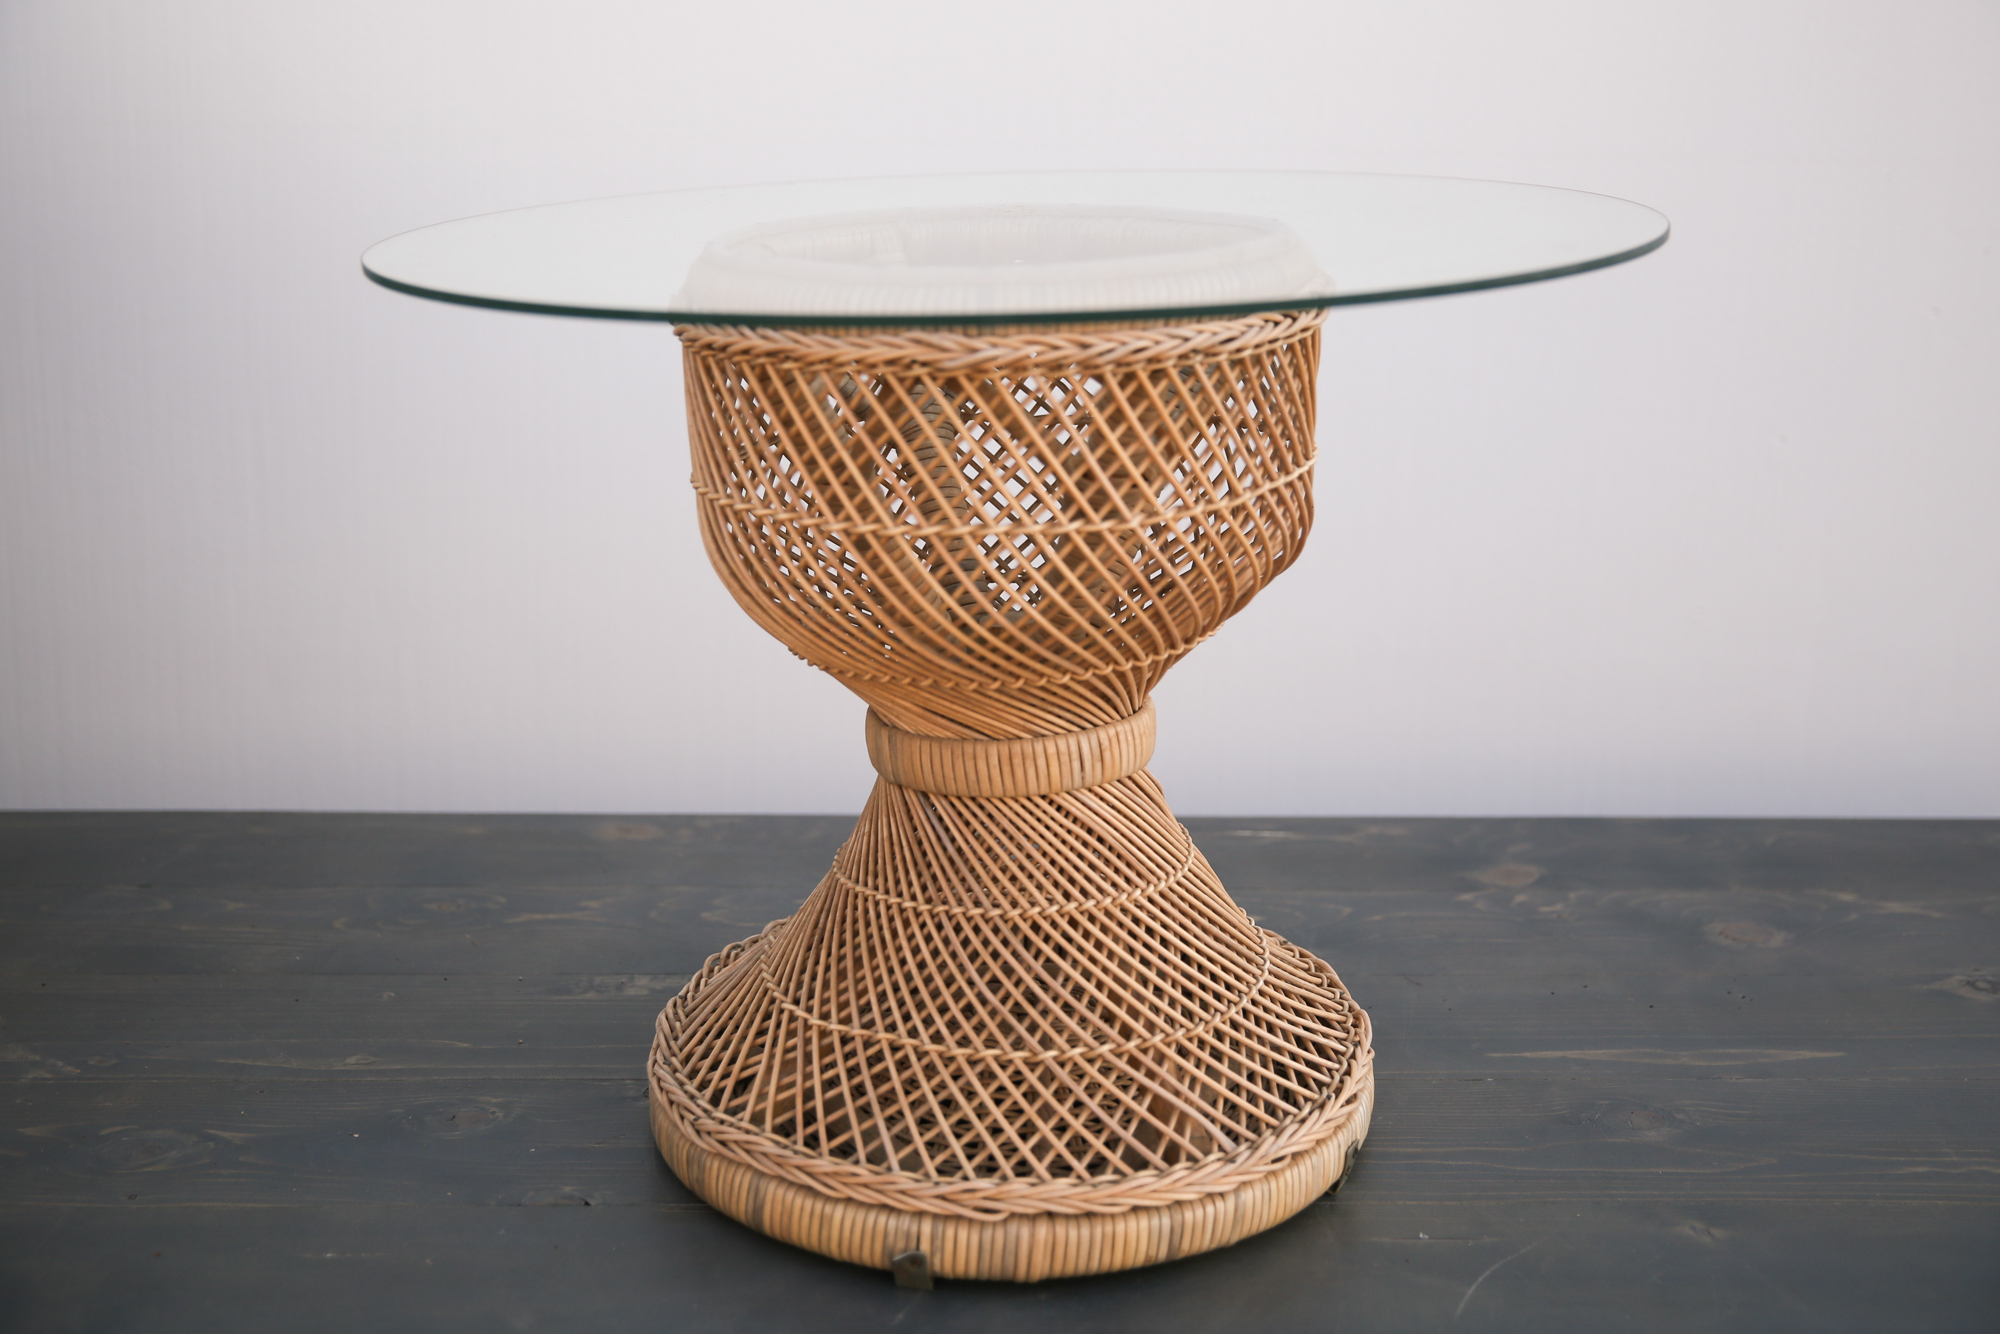 Glass Top Wicker Coffee Table Out Of, Wicker Side Table With Glass Top